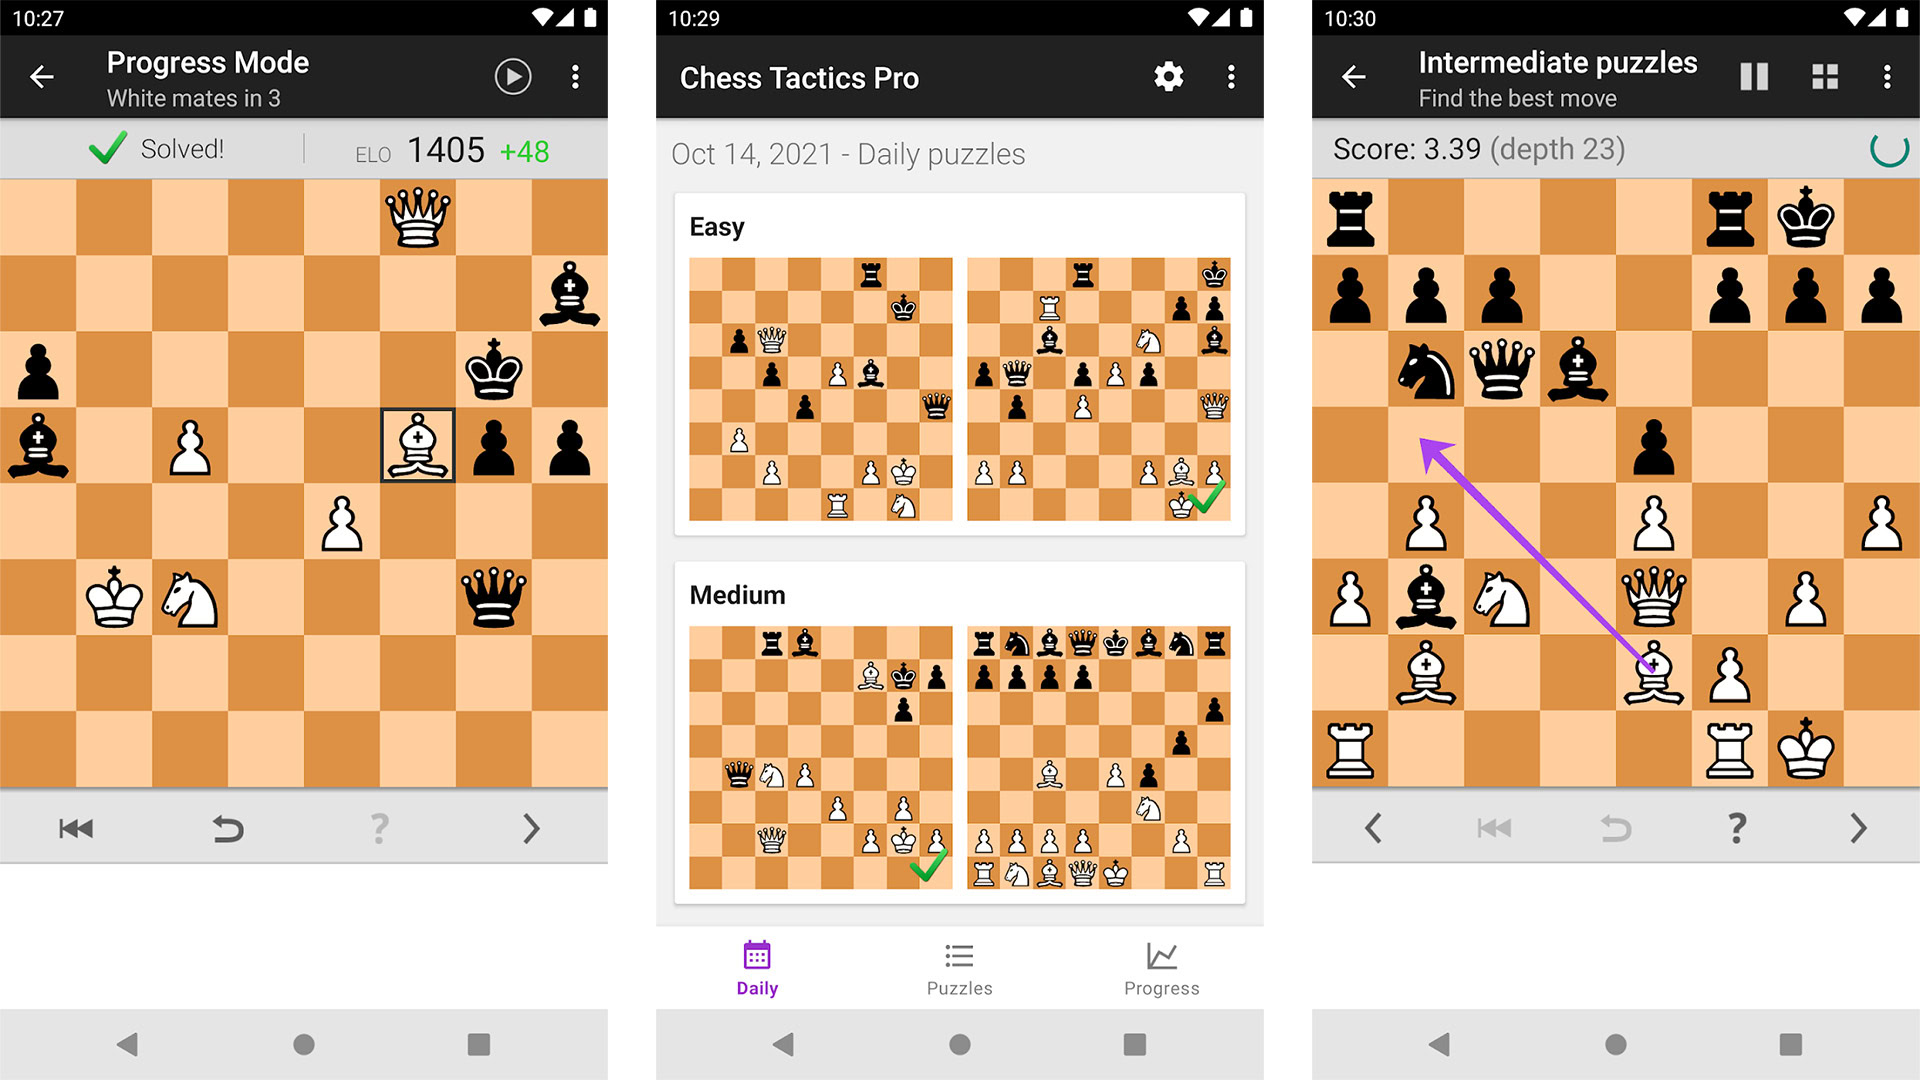 Chess Openings Trainer Lite for Android - Download